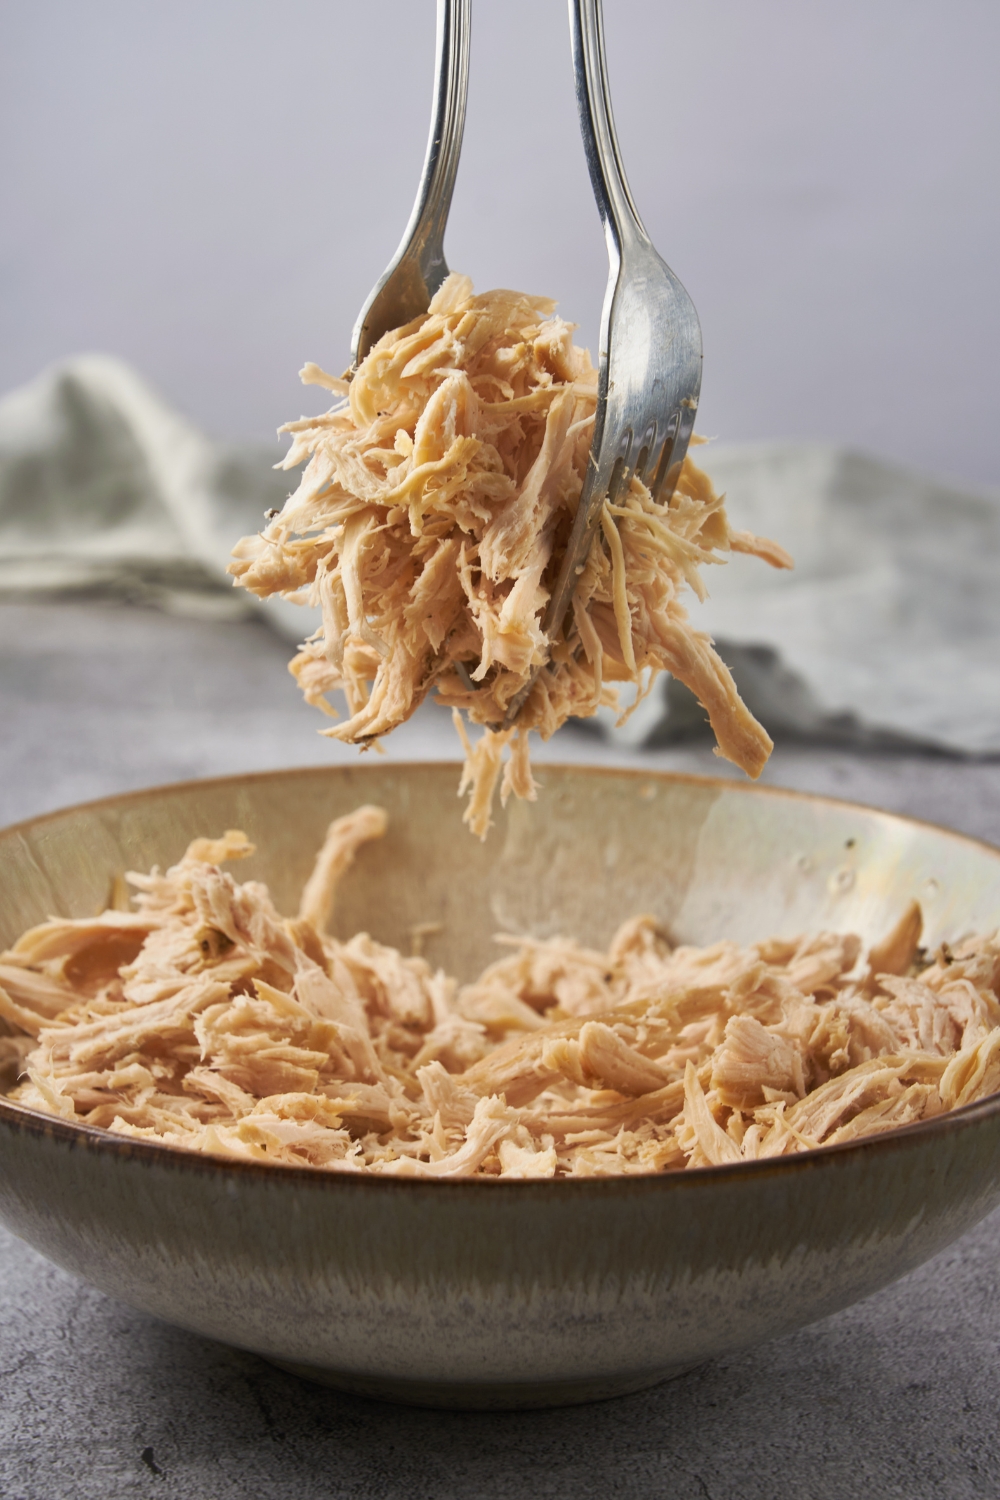 A scoop of shredded chicken held by two forks above a bowl of shredded chicken.